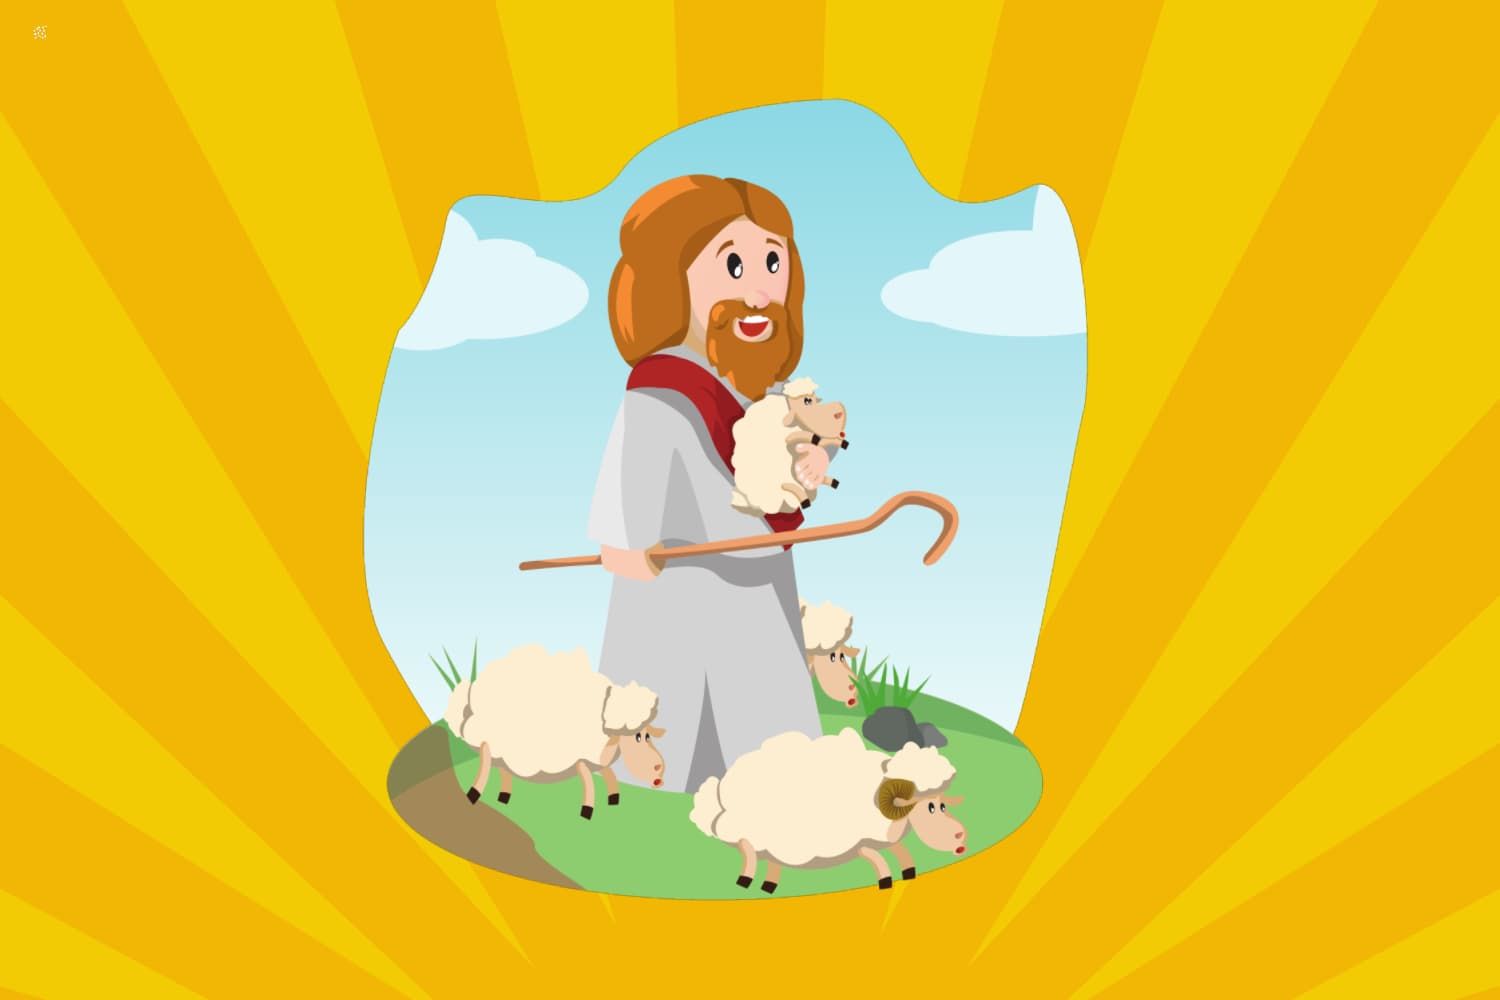 Childrens%20moment%20-%20NT%20Teaching%20on%20the%20good%20shepherd%20-%20Recognizing%20the%20shepherds%20voice%202-62442aa4 Safety / security